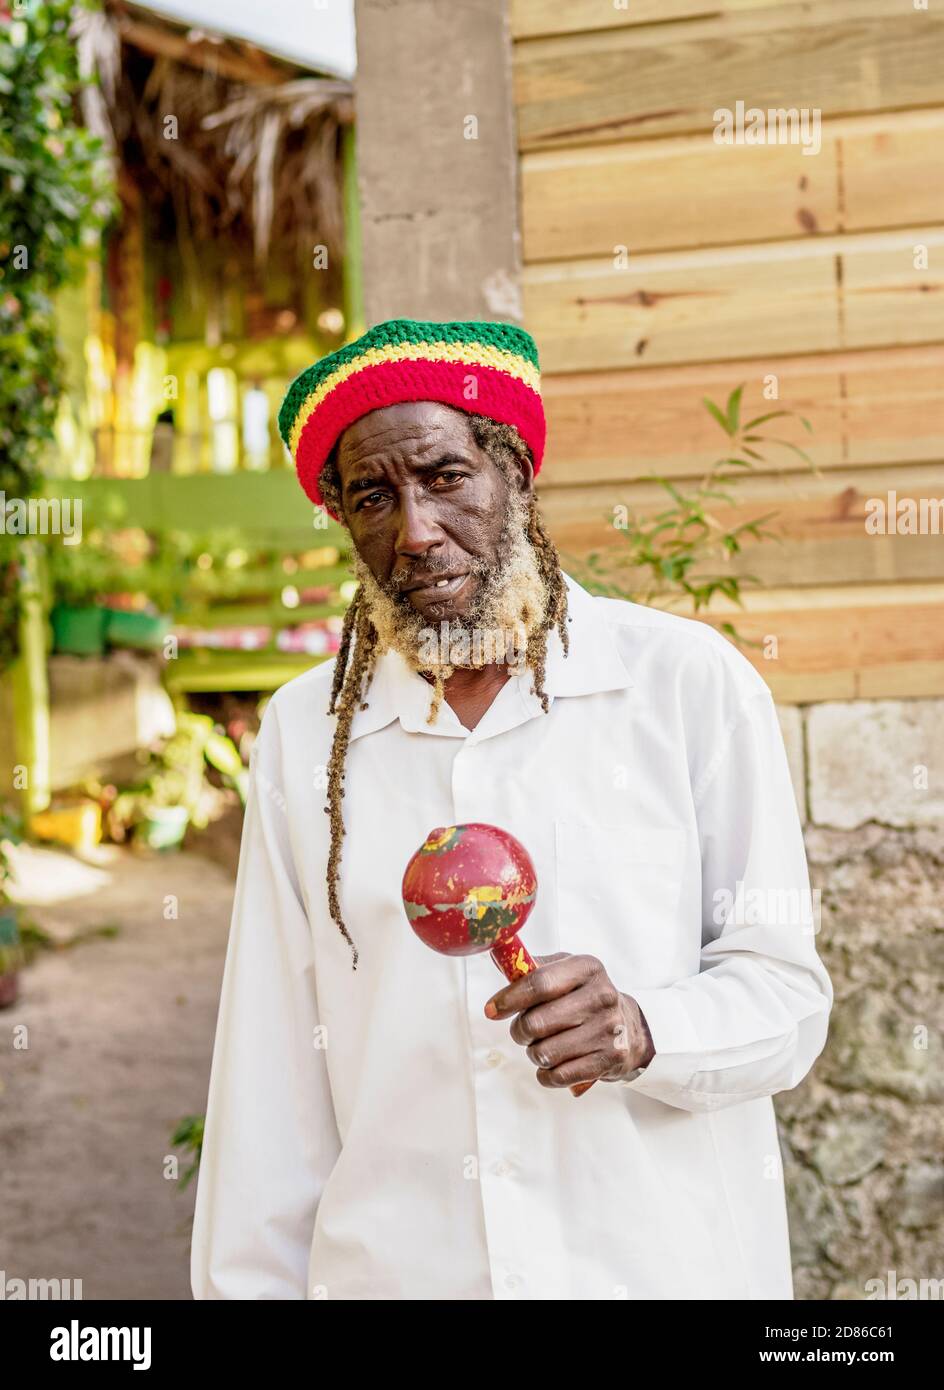 Rasta Man High Resolution Stock Photography And Images Alamy